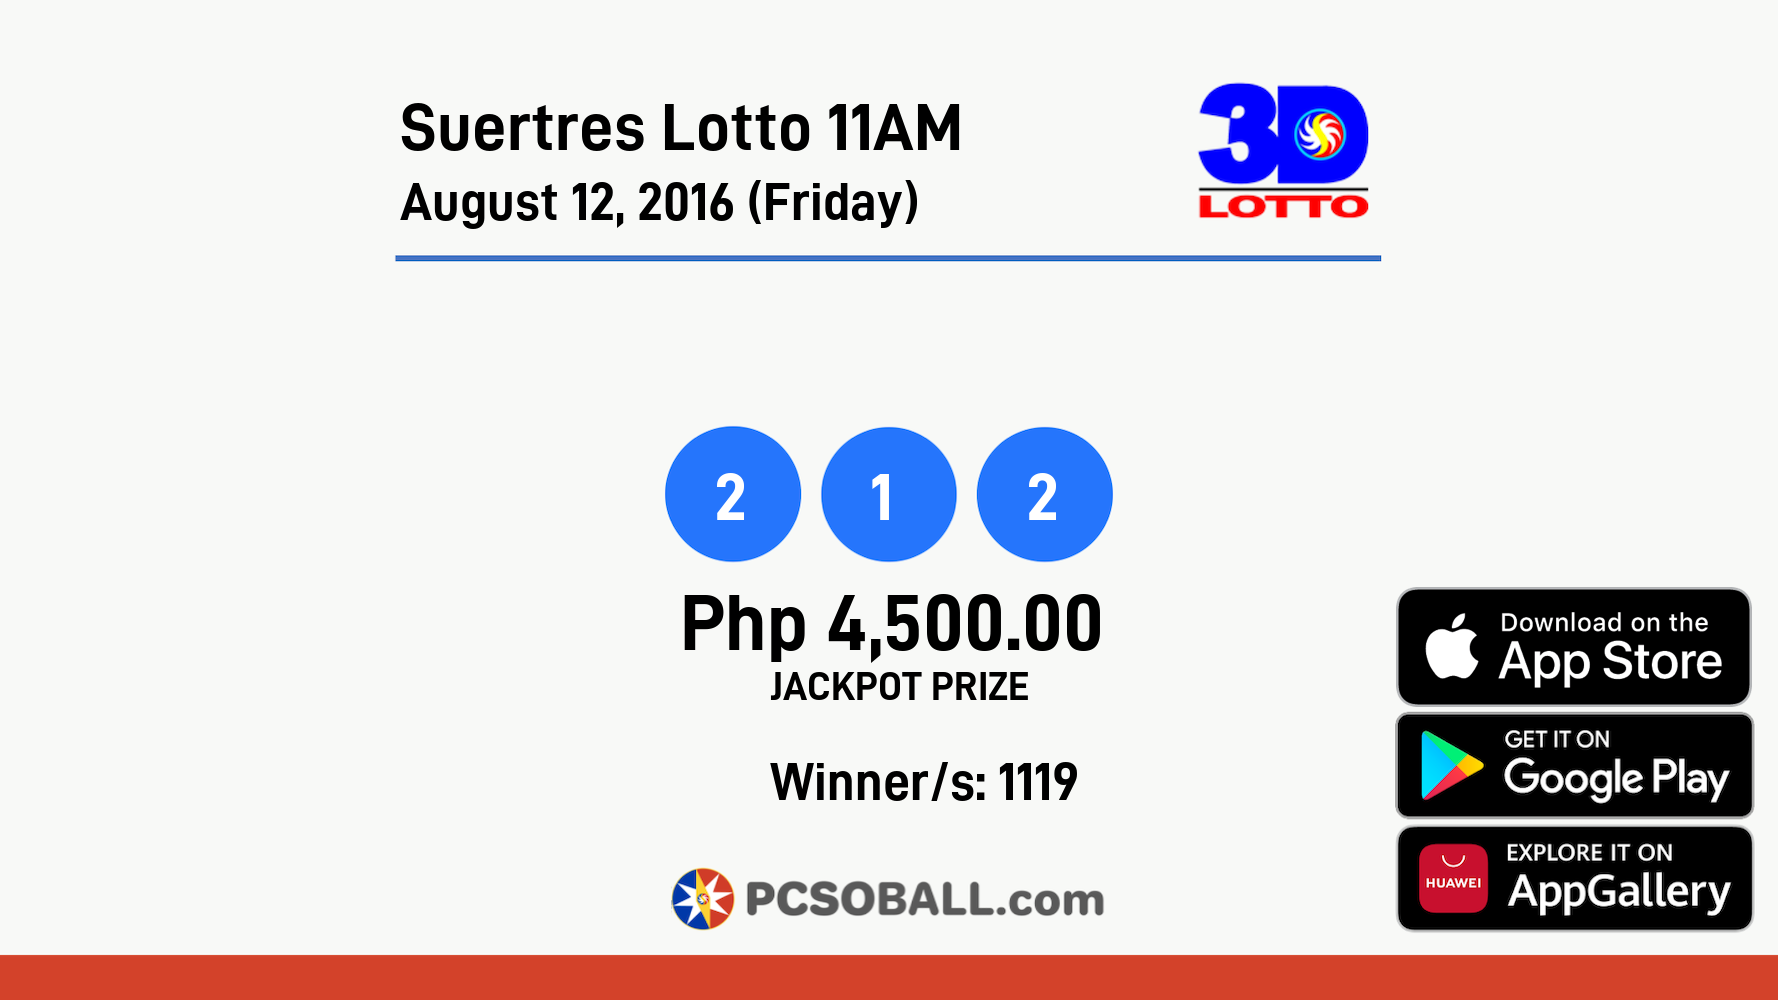 Suertres Lotto 11AM August 12, 2016 (Friday) Result